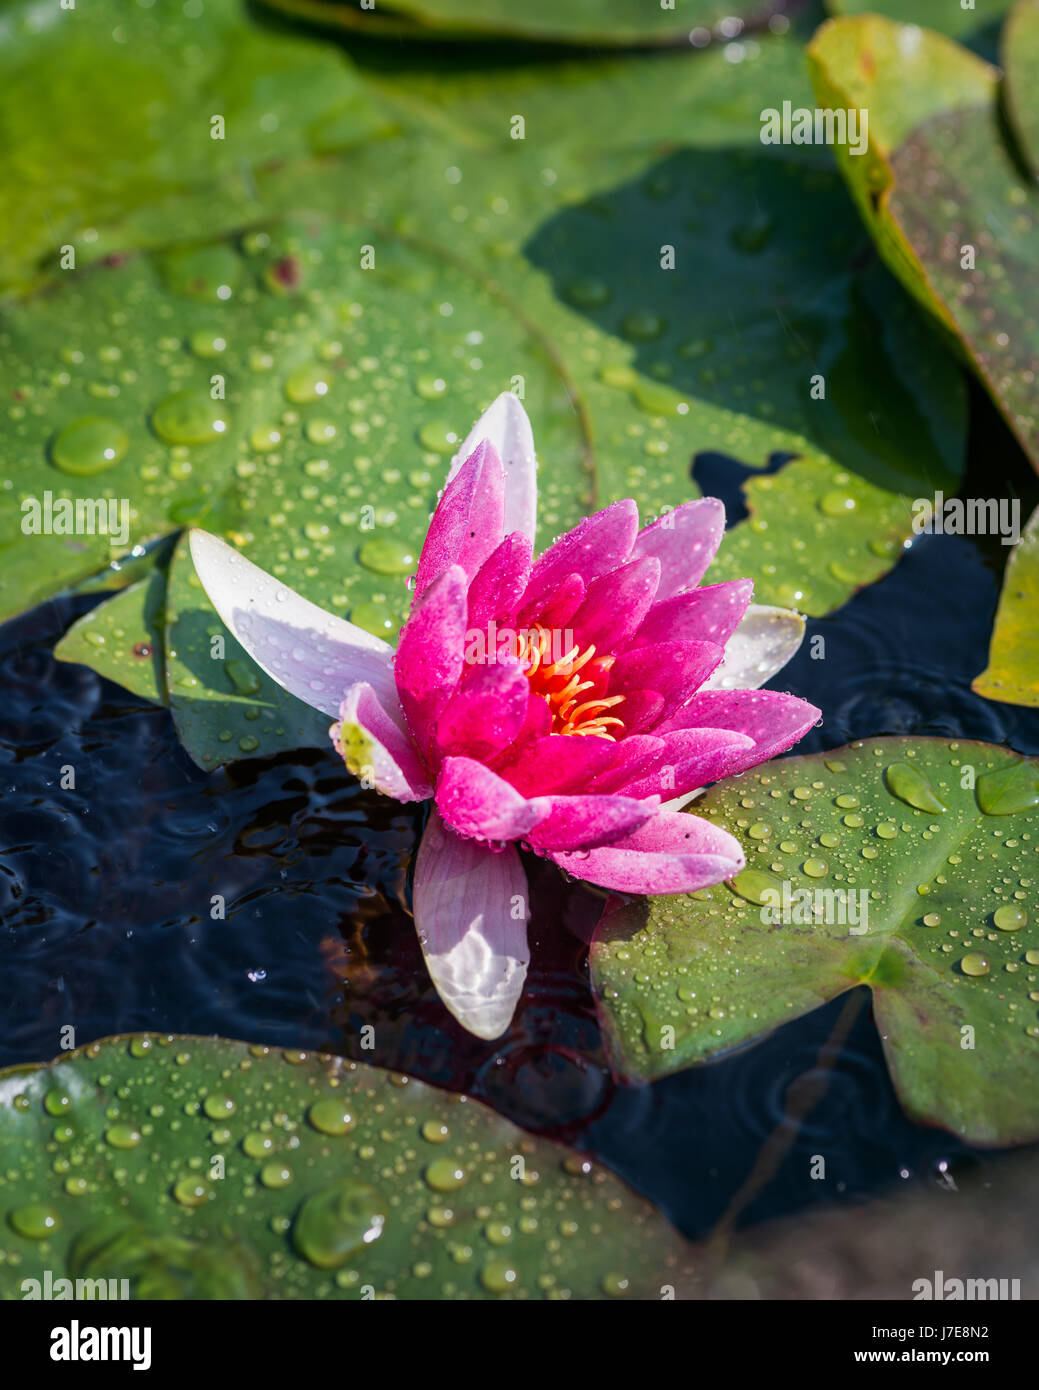 A pink water lily flower and leaf pads Stock Photo